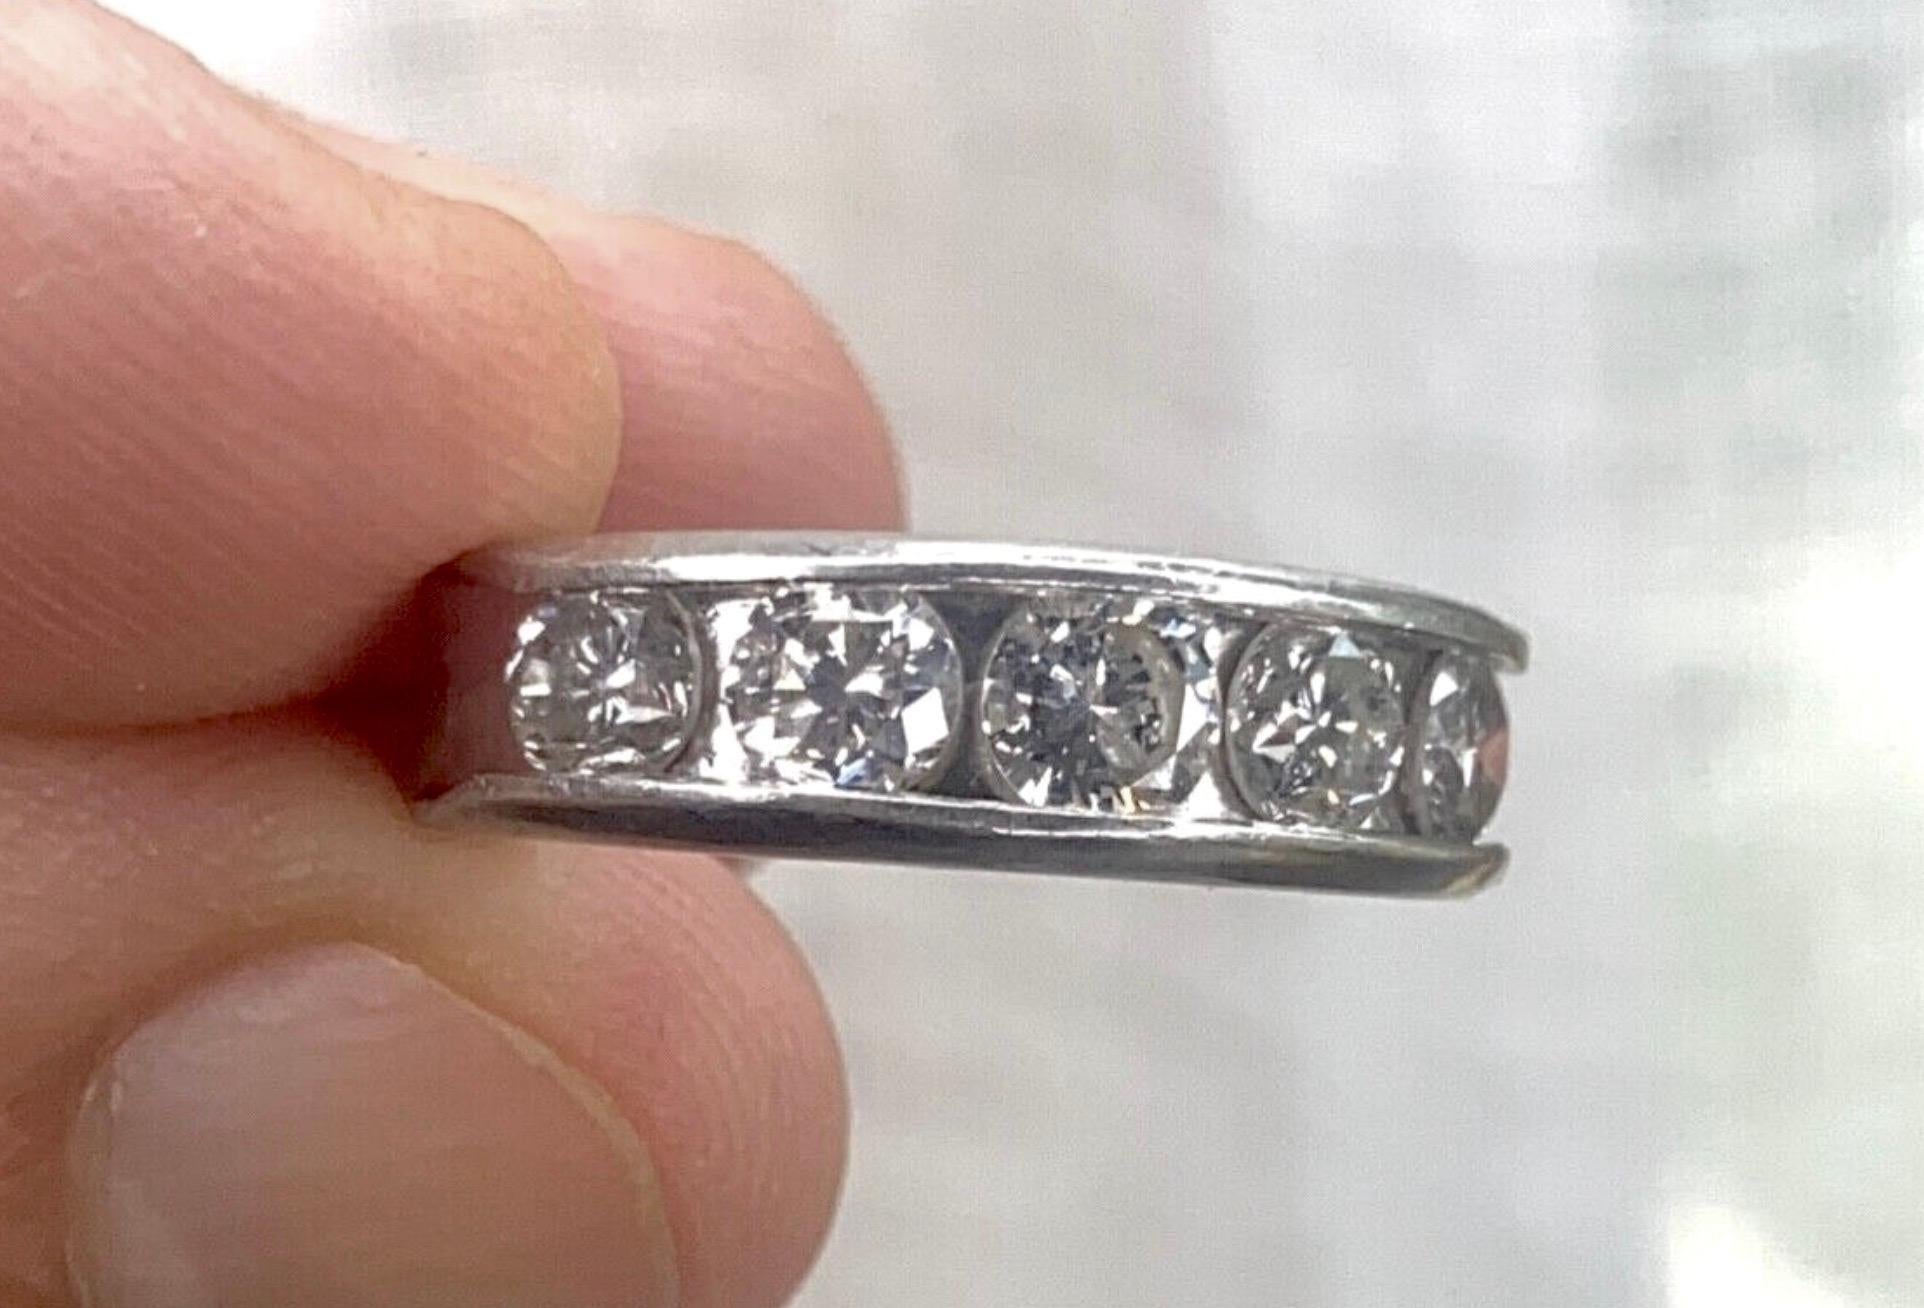 5 DIAMOND VINTAGE PLATINUM 1.50 CARATS DIAMOND ETERNITY BAND CHANNEL SET RING

1.50 CT DIAMOND COLOR (5 DIAMONDS)

CLARITY H/SI2

SIZE 5.75  (Sizable) 

TOTAL RING WEIGHT 7.85g

VINTAGE / VERY GOOD CONDITION 
